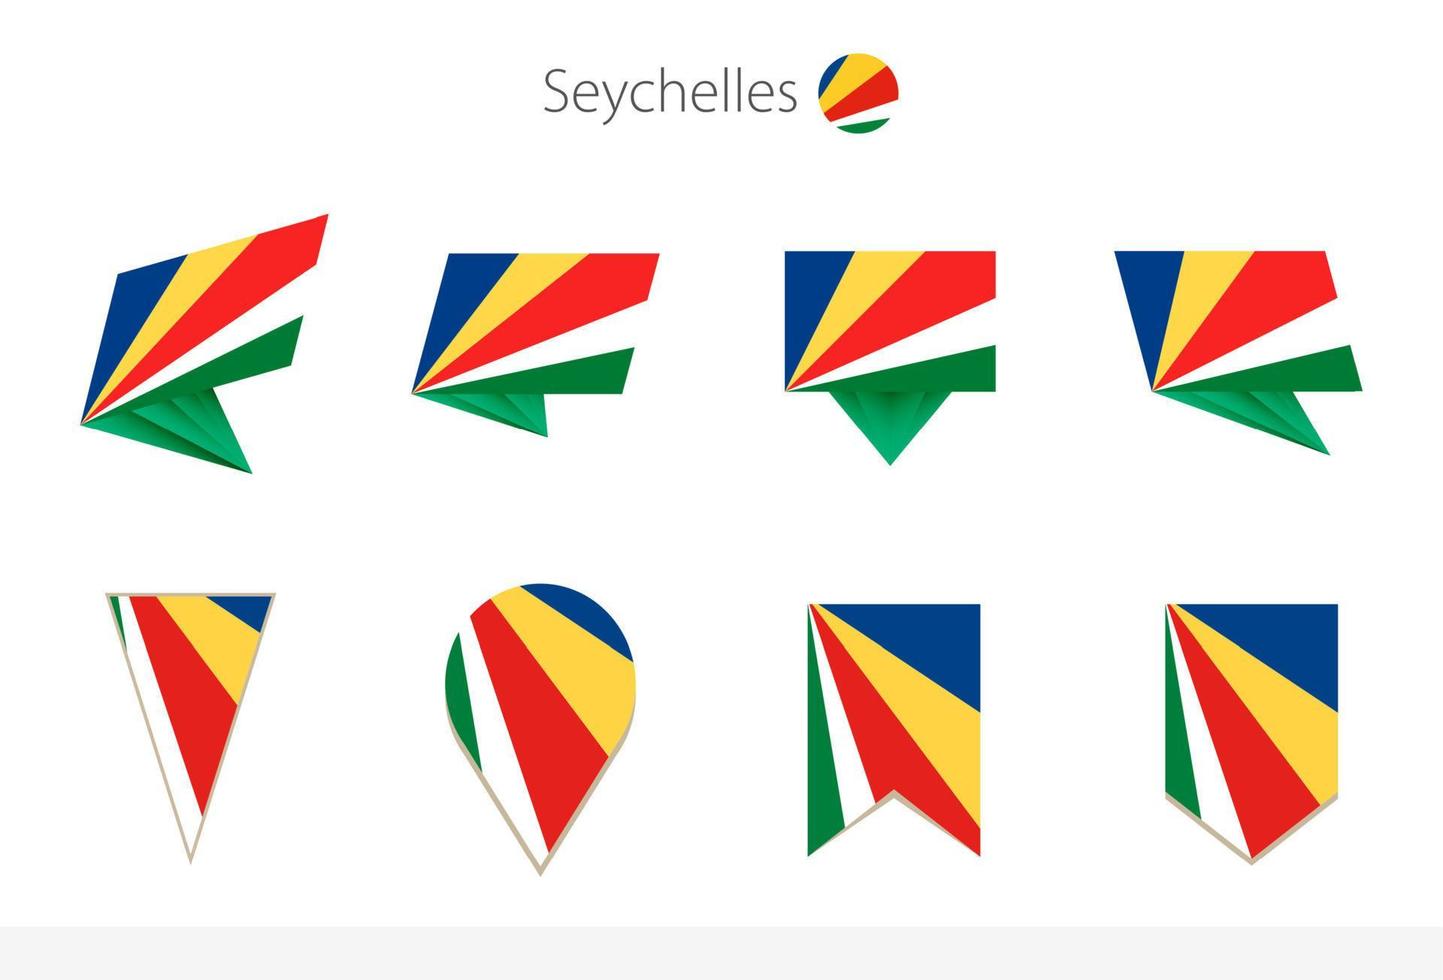 Seychelles national flag collection, eight versions of Seychelles vector flags.